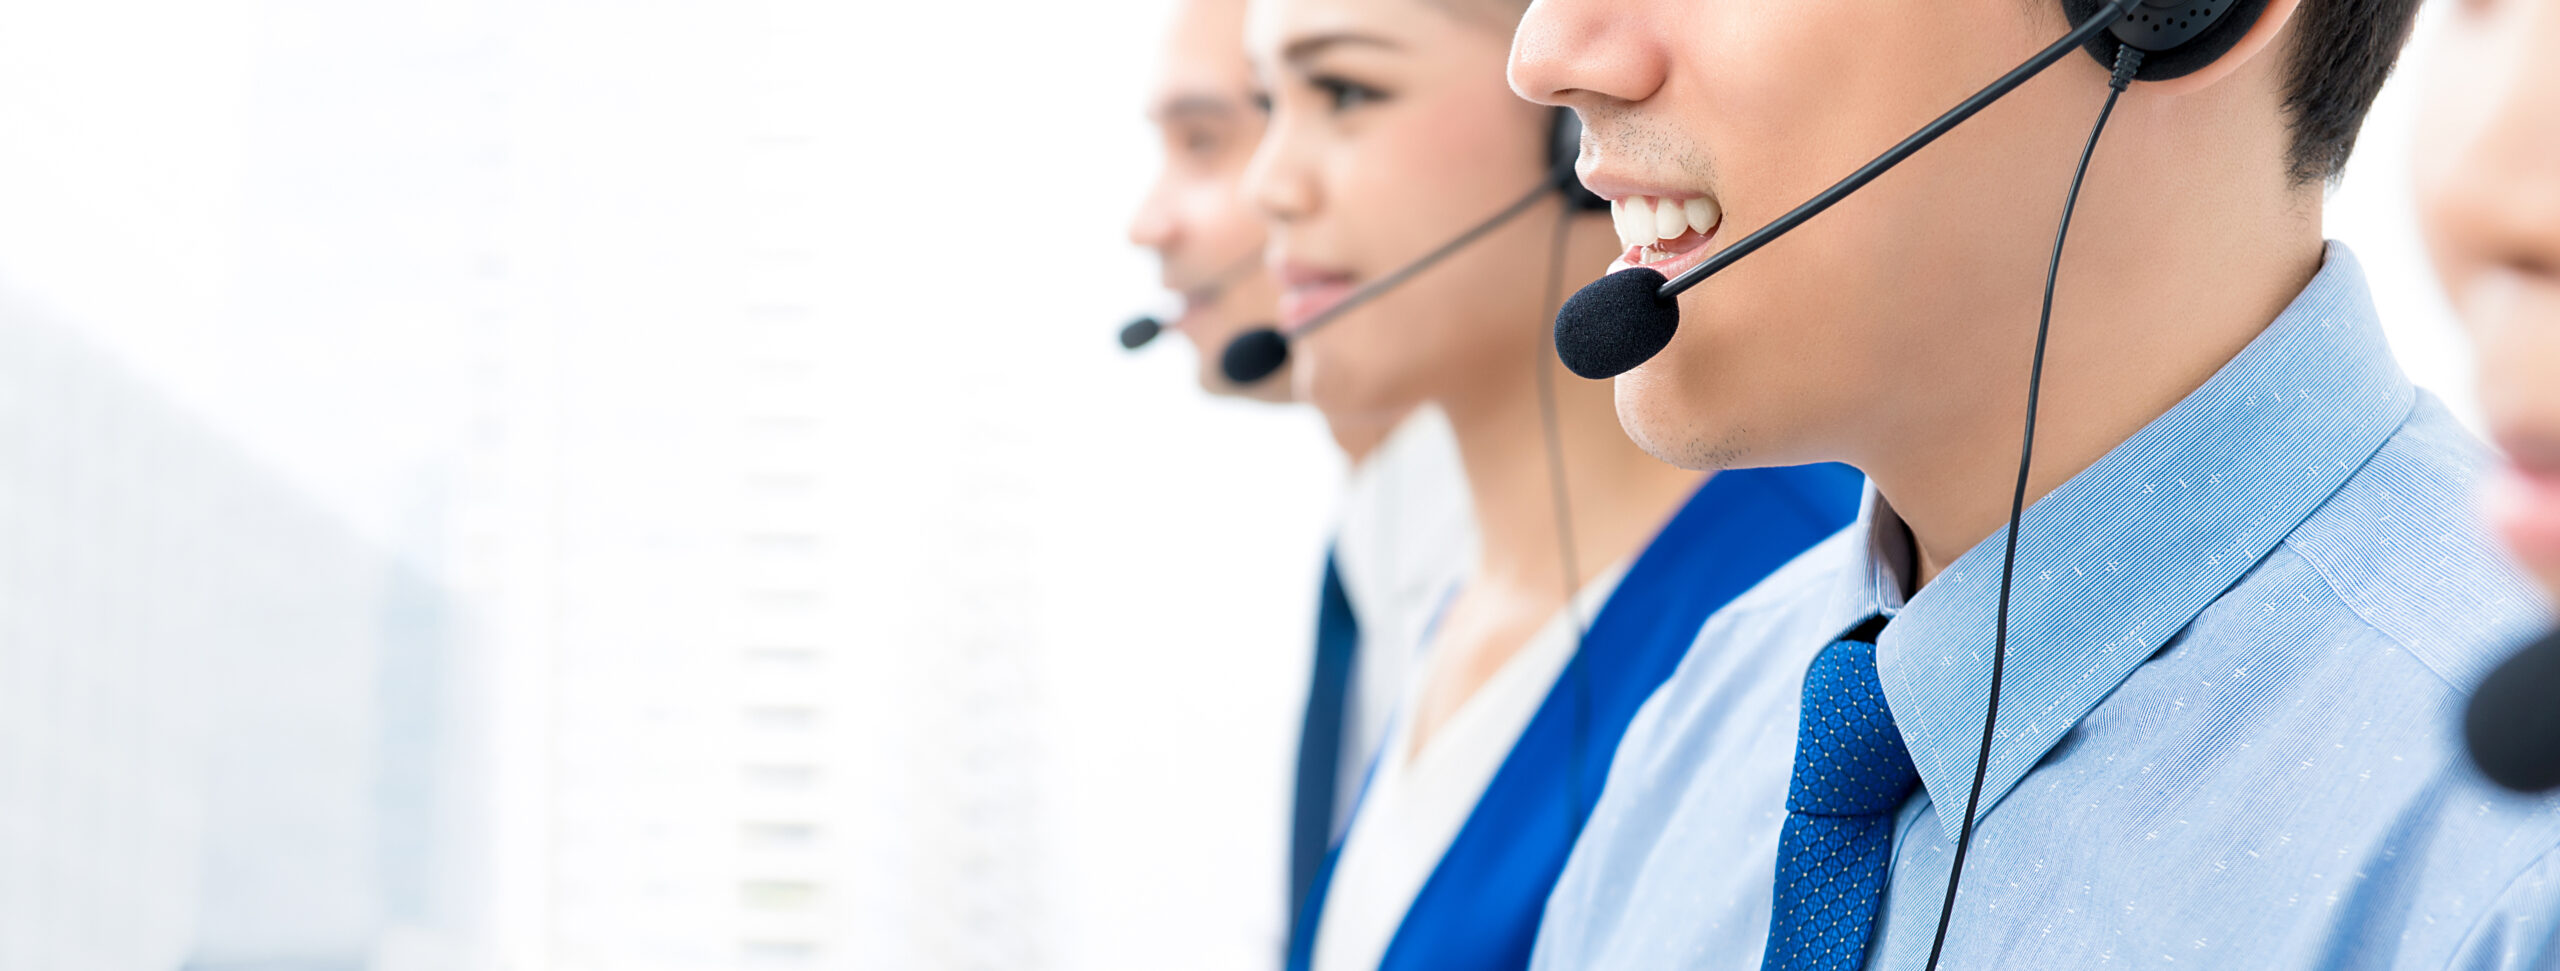 Why Philippines for Call Center Outsourcing?